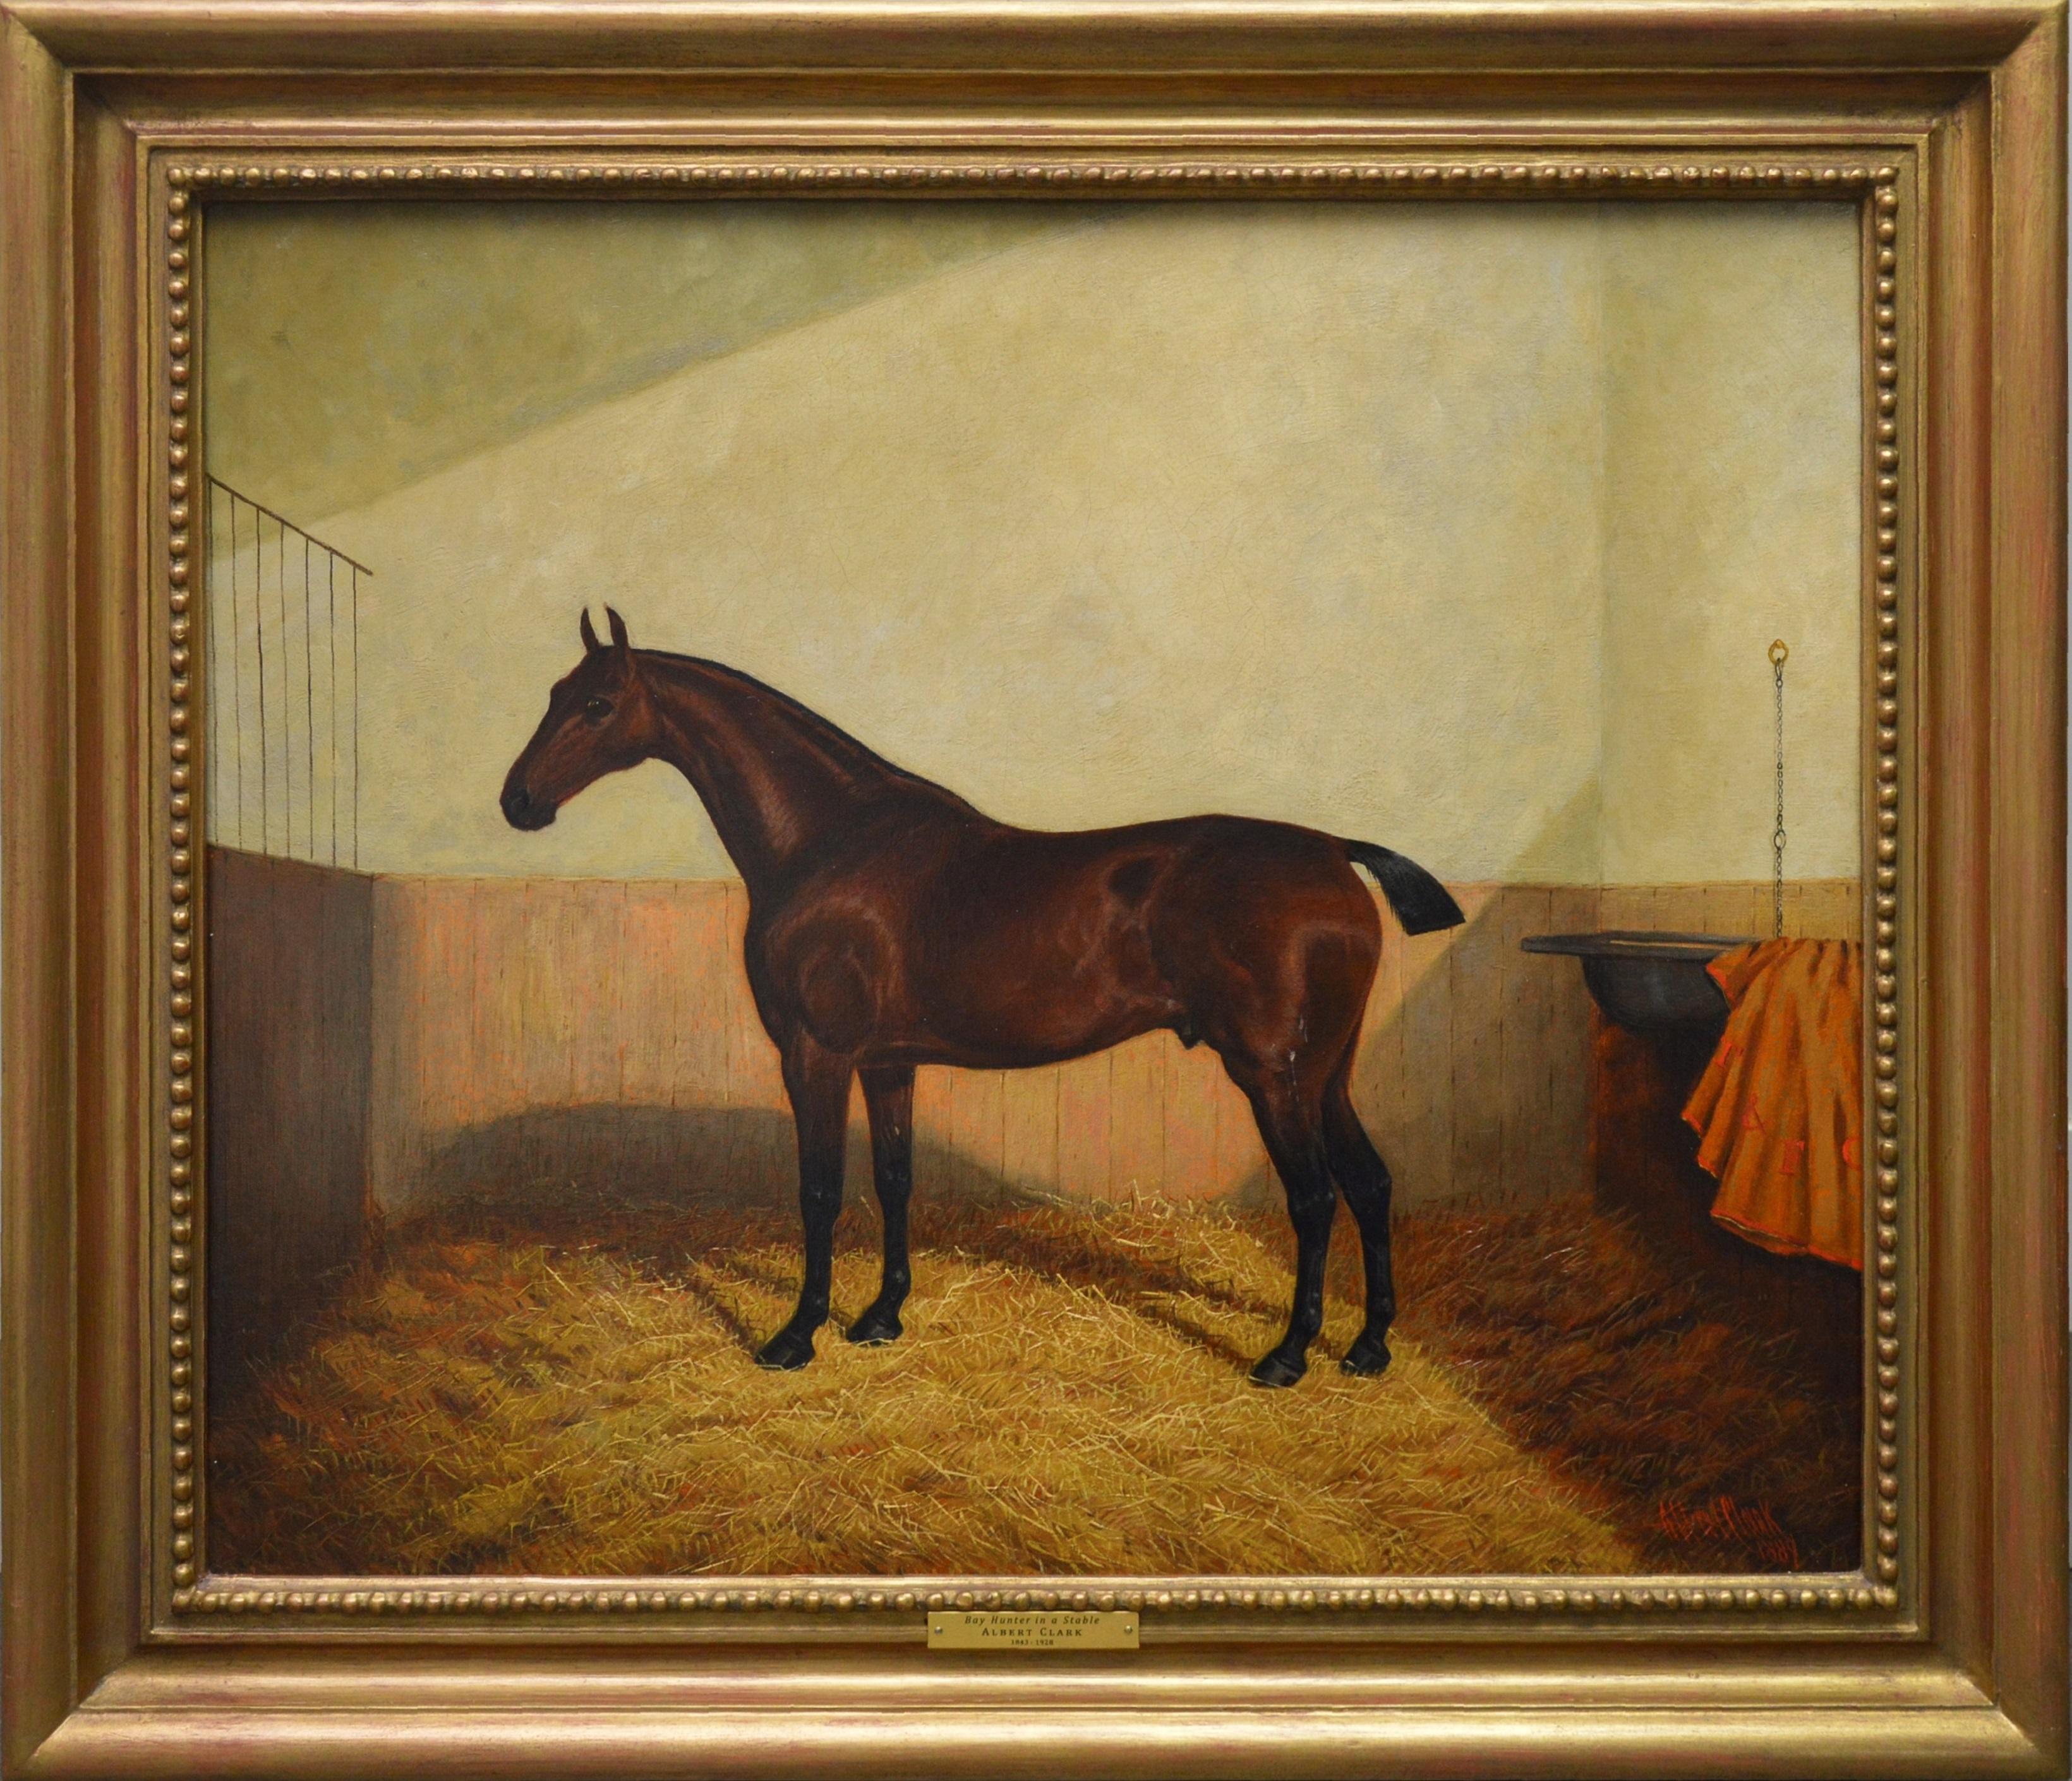 Albert Clark Portrait Painting - Bay Hunter in a Stable - 19th Century Equine Portrait Oil Painting 